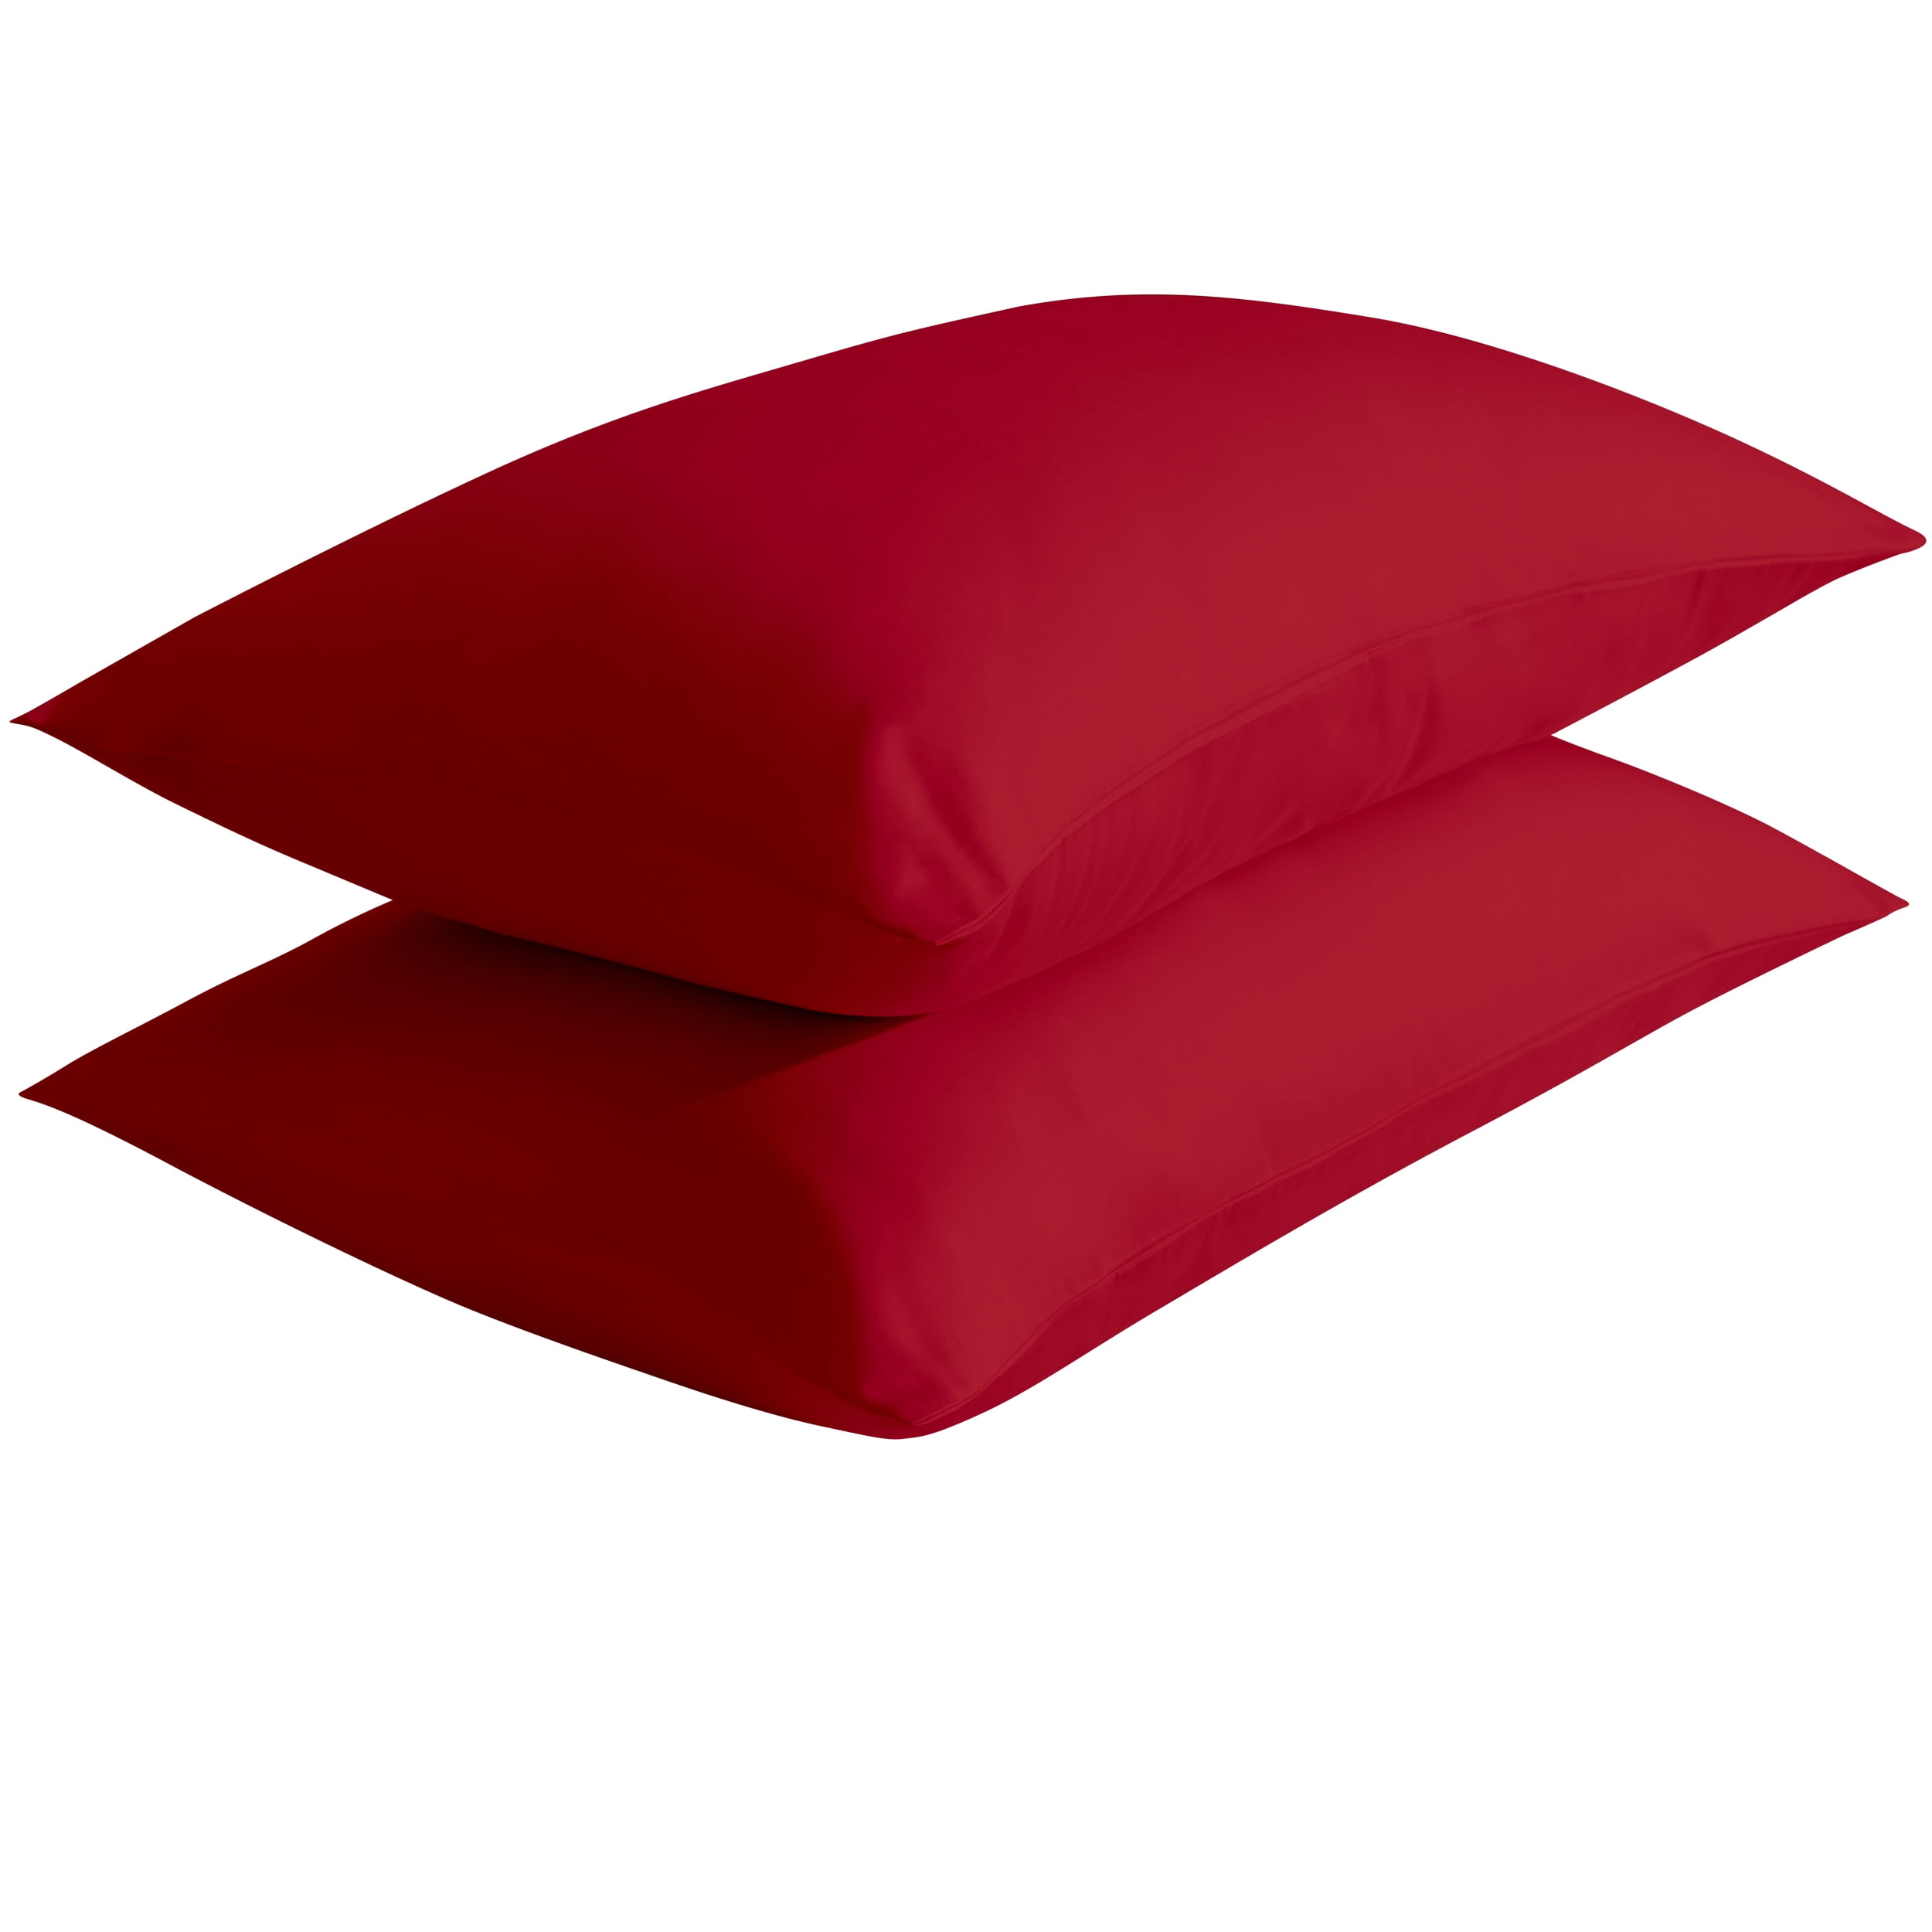 Details about   FLXXIE 2 Pack Zippered Satin Standard Pillowcases Dark G Silky Soft and Luxury 